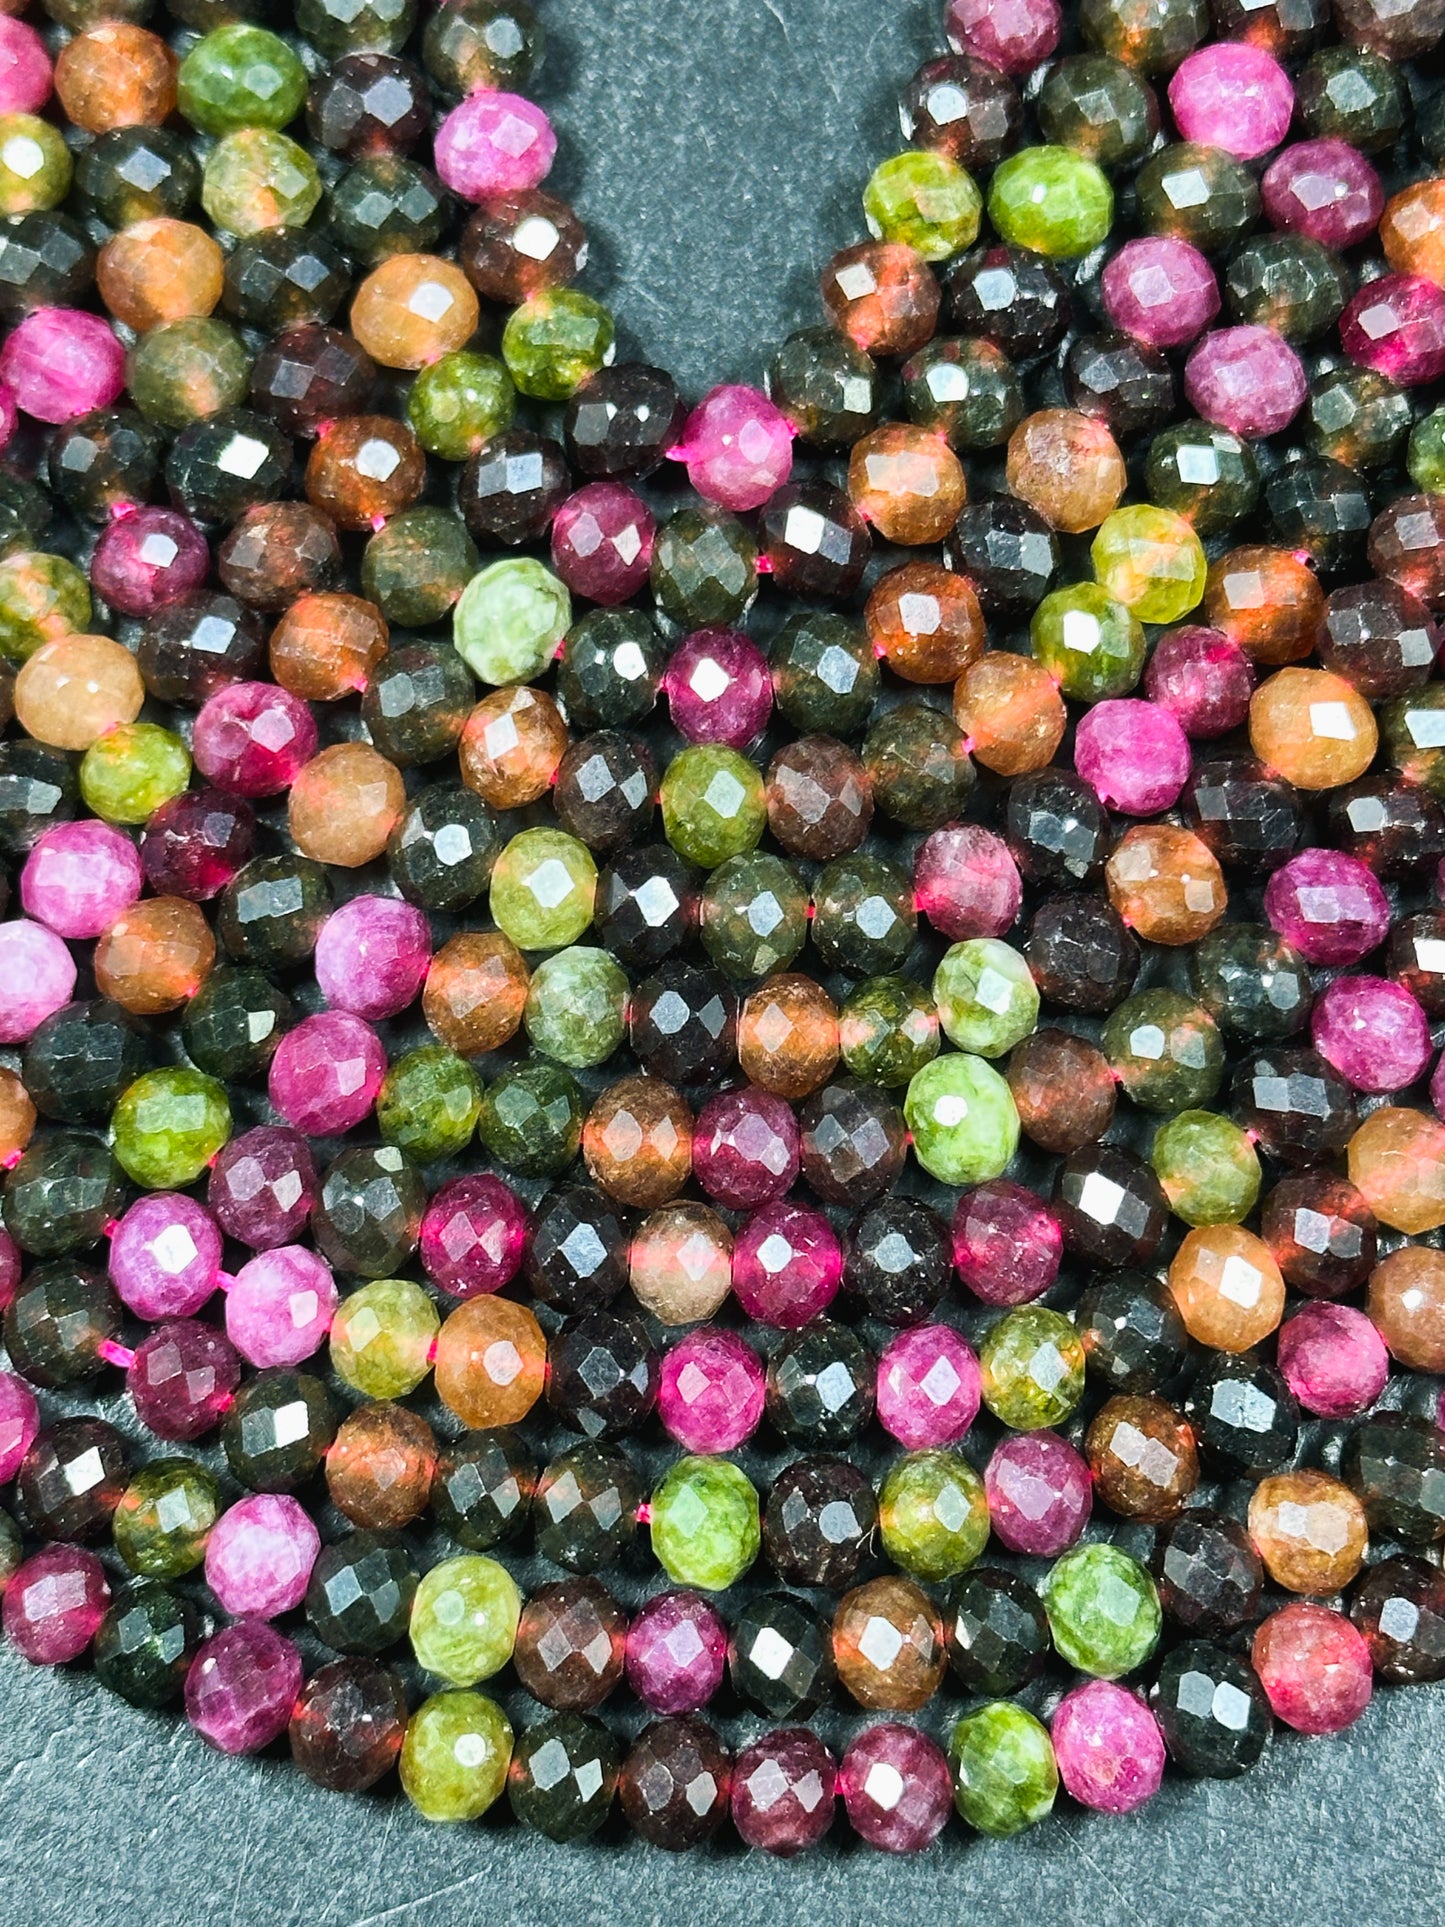 NATURAL Tourmaline Gemstone Bead Faceted 6x5mm 8x6mm Rondelle Shape, Beautiful Multicolor Tourmaline Gemstone Bead Great Quality Full Strand 15.5"